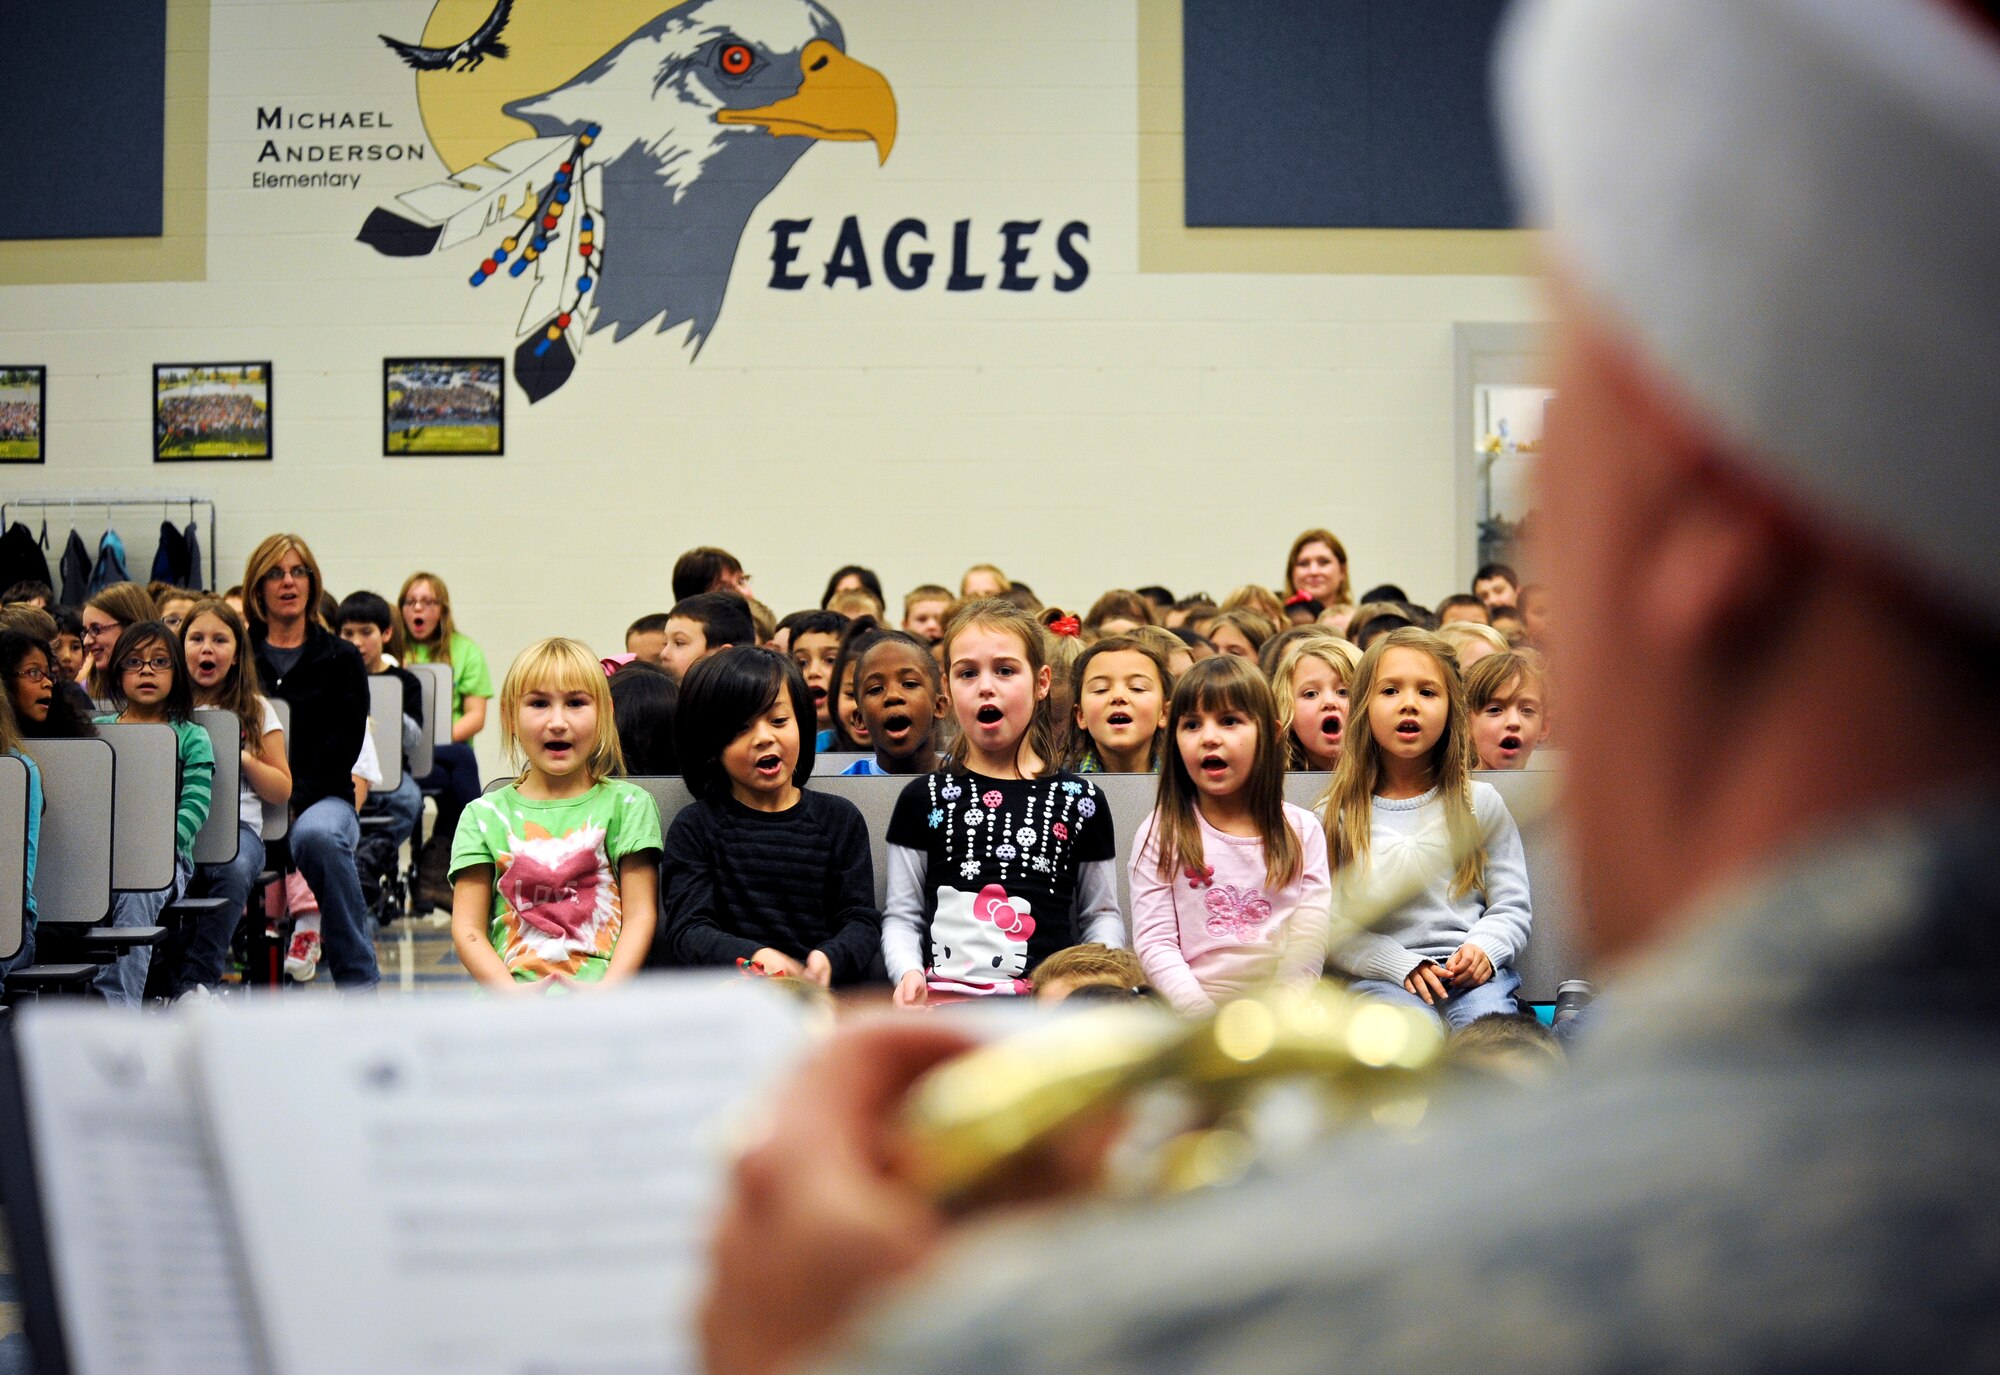 The Golden West Brass Quintet from Travis Air Force Base, Calif., plays for students and faculty at Michael Anderson Elementary School during the band’s visit to Fairchild Air Force Base, Wash., Dec. 14, 2012. The band visited Fairchild and the surrounding community Dec. 13 and 14, playing holiday classics such as “We wish you a Merry Christmas” and “Jingle Bell Rock.” (U.S. Air Force photo by Senior Airman Benjamin Stratton)